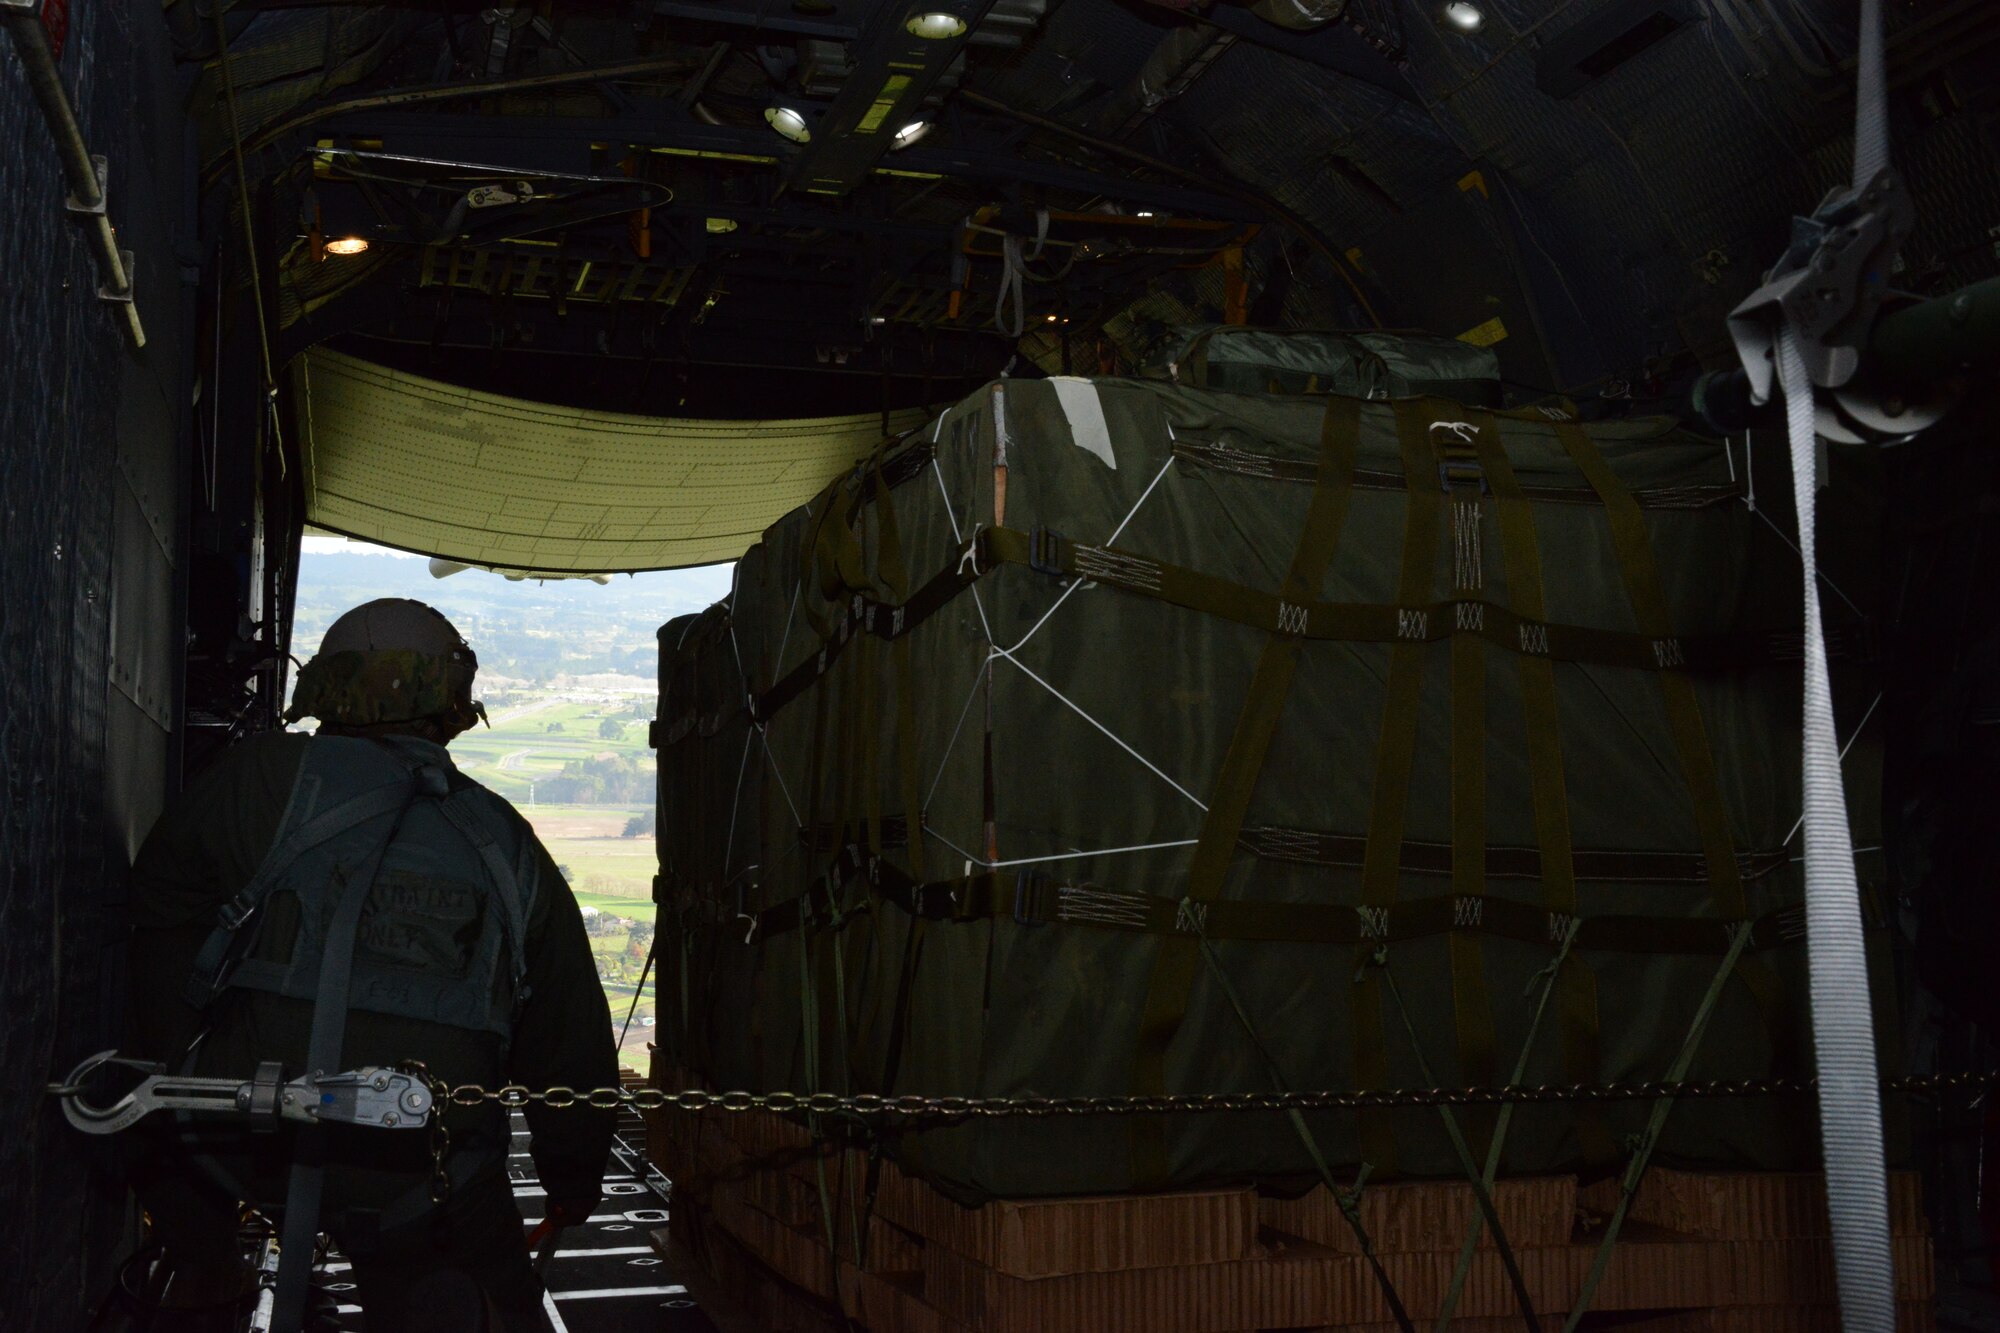 A 1st Special Operations Squadron loadmaster prepares to drop a container delivery system bundle over a drop zone in New Zealand June 20, 2016. Members from the 353rd Special Operations Group participated in Exercise Teak Net June 12 through 30 in Whenuapai, New Zealand. During the exercise, members from both the New Zealand Defense Force and U.S. Air Forces worked together to conduct personnel and equipment air drops while exchanging new techniques. (U.S. Air Force photo by Master Sgt. Kristine Dreyer)